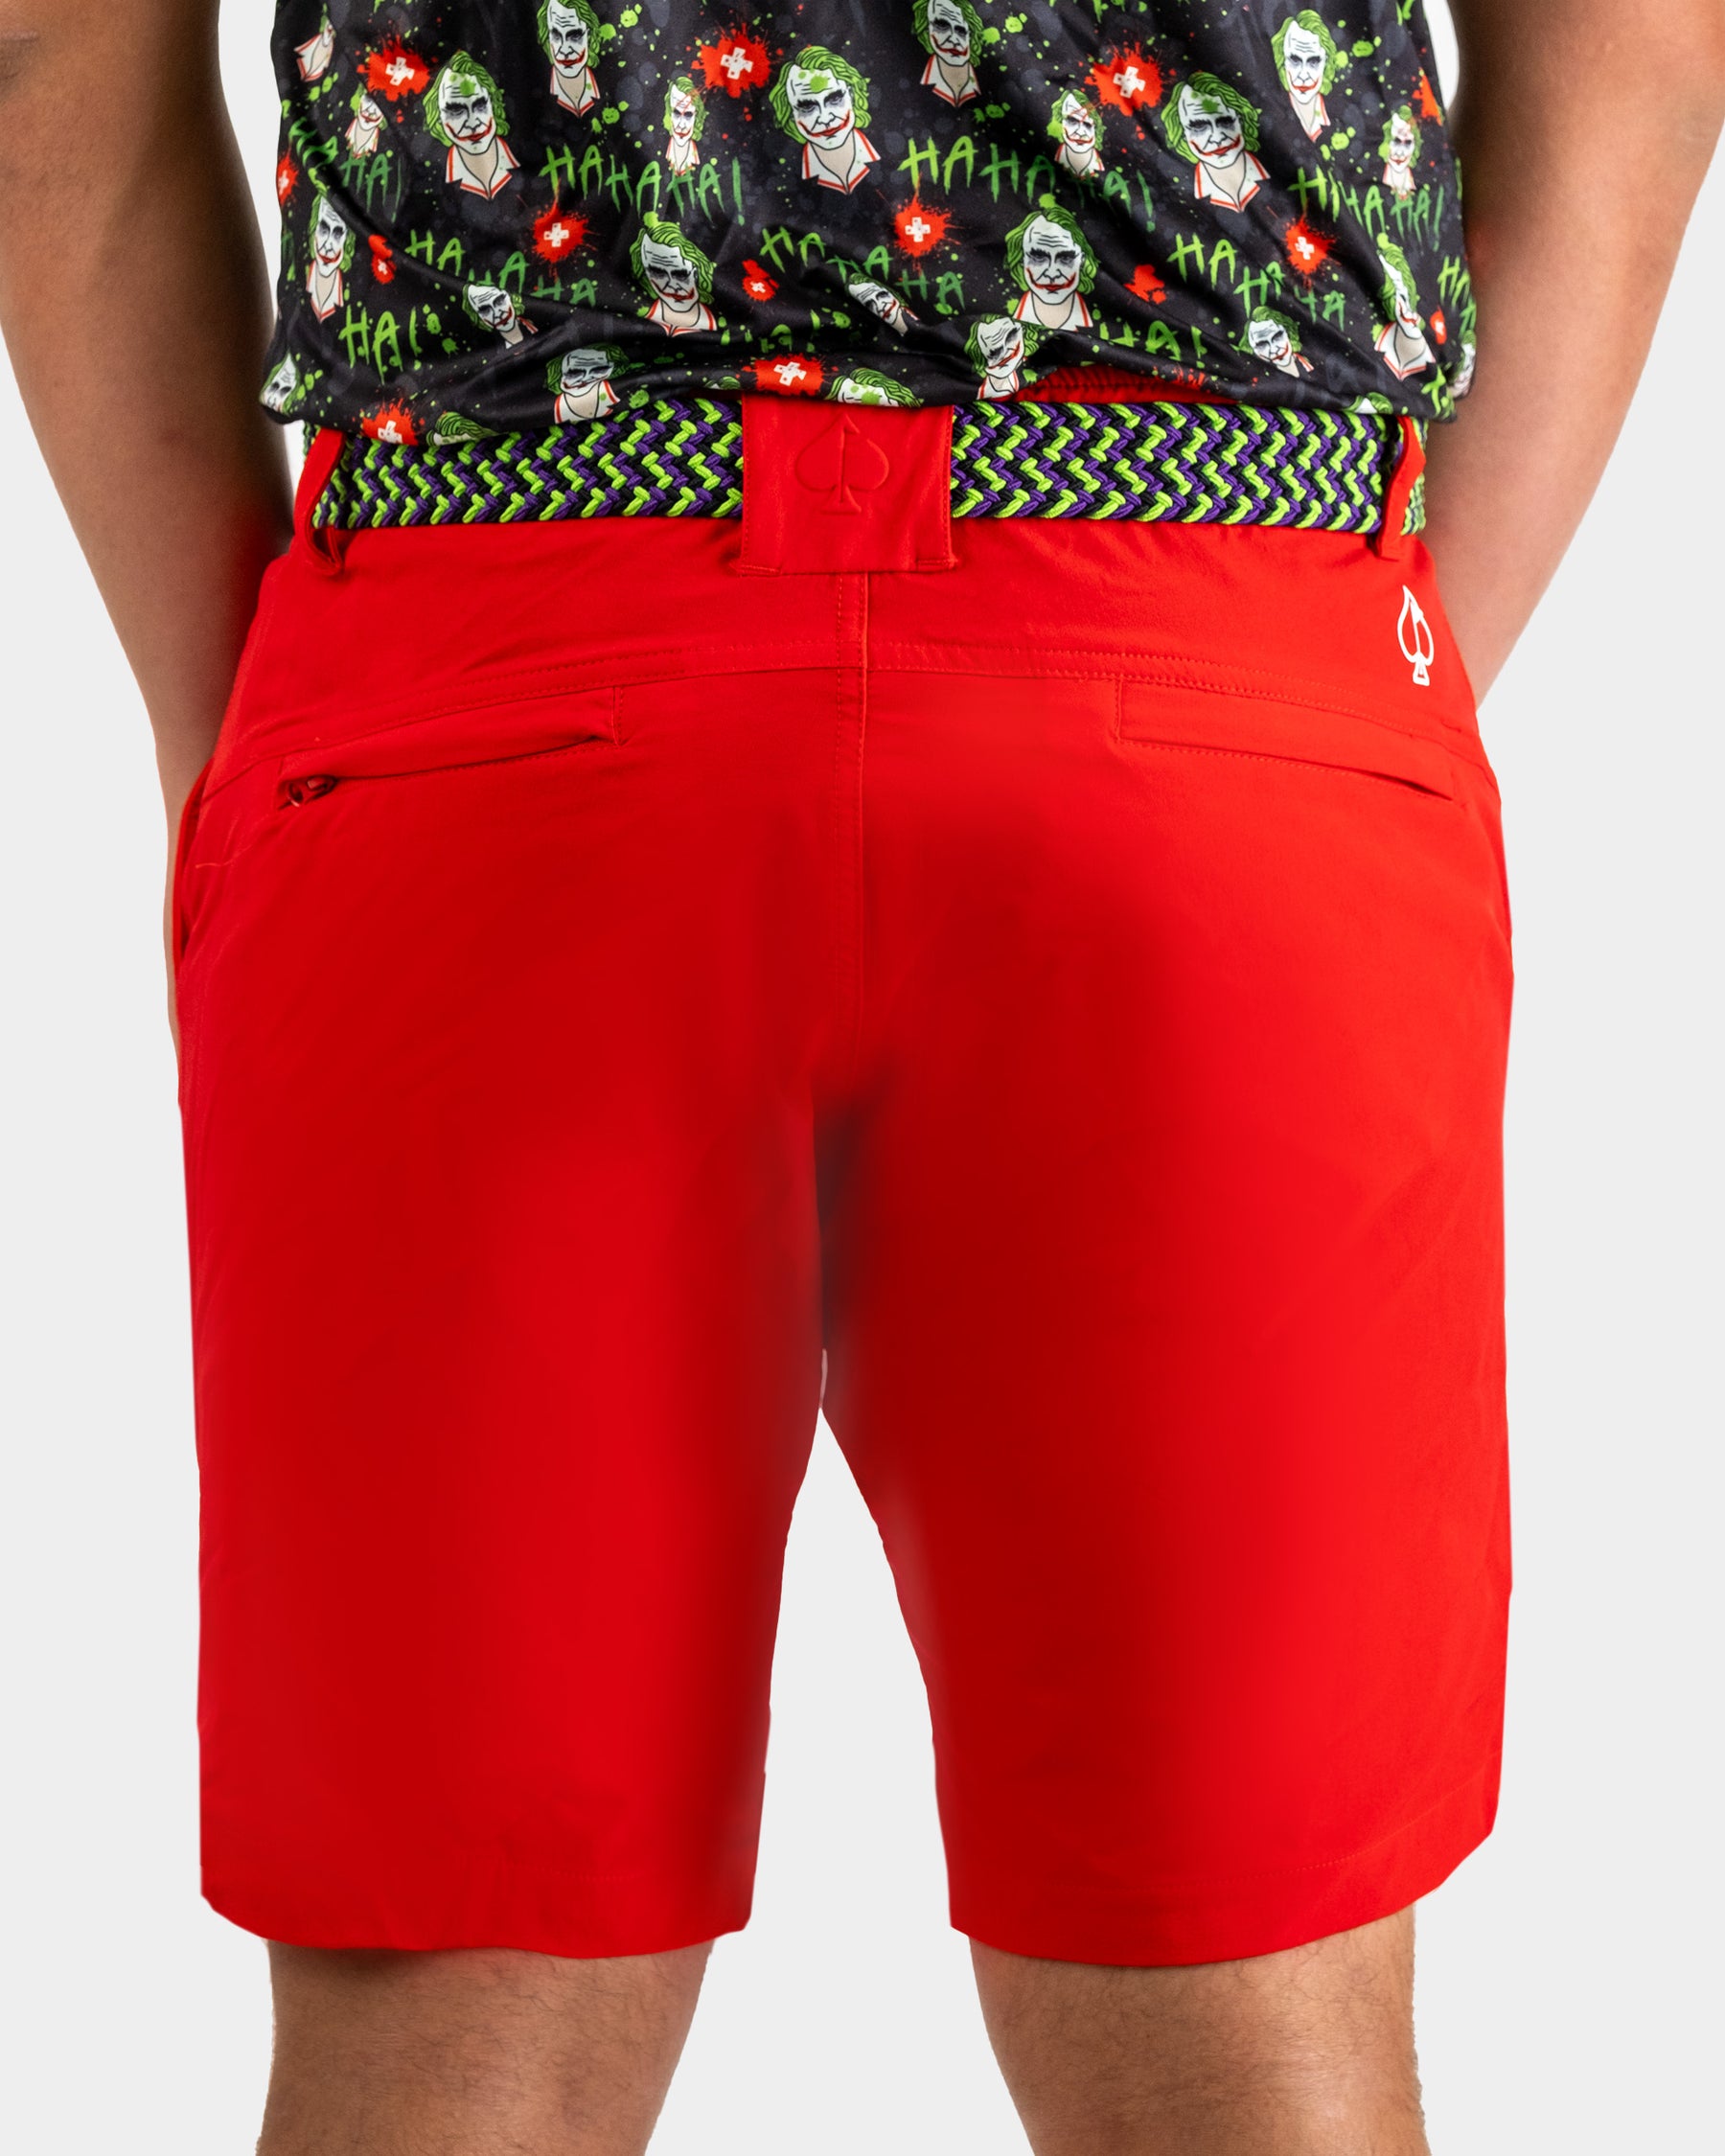 Performance Shorts - Red